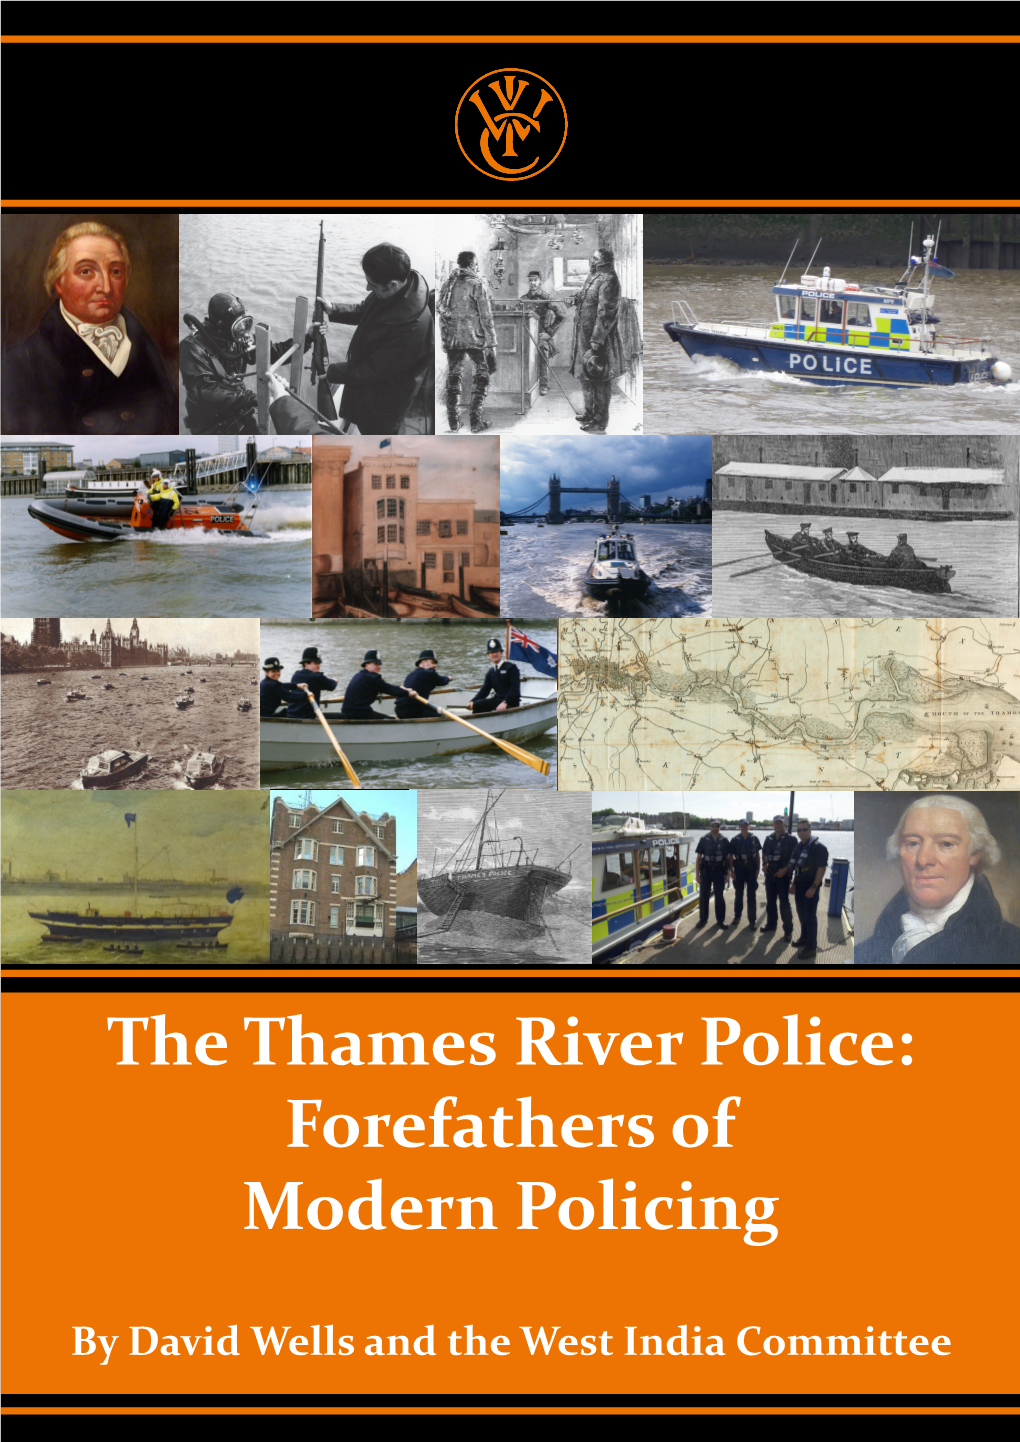 The Thames River Police: Forefathers of Modern Policing